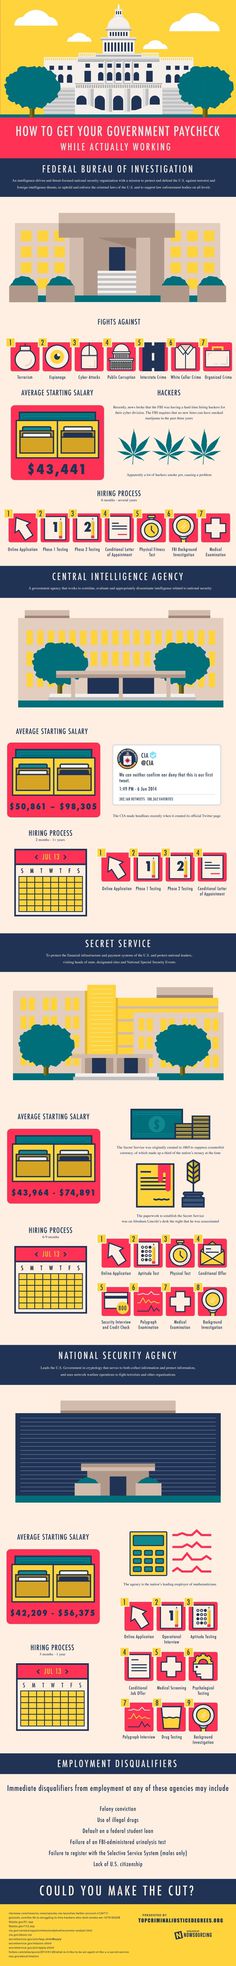 Do you know how to get government jobs? Check out this infographic for more. #secret #government #jobs #fbi #service #cia